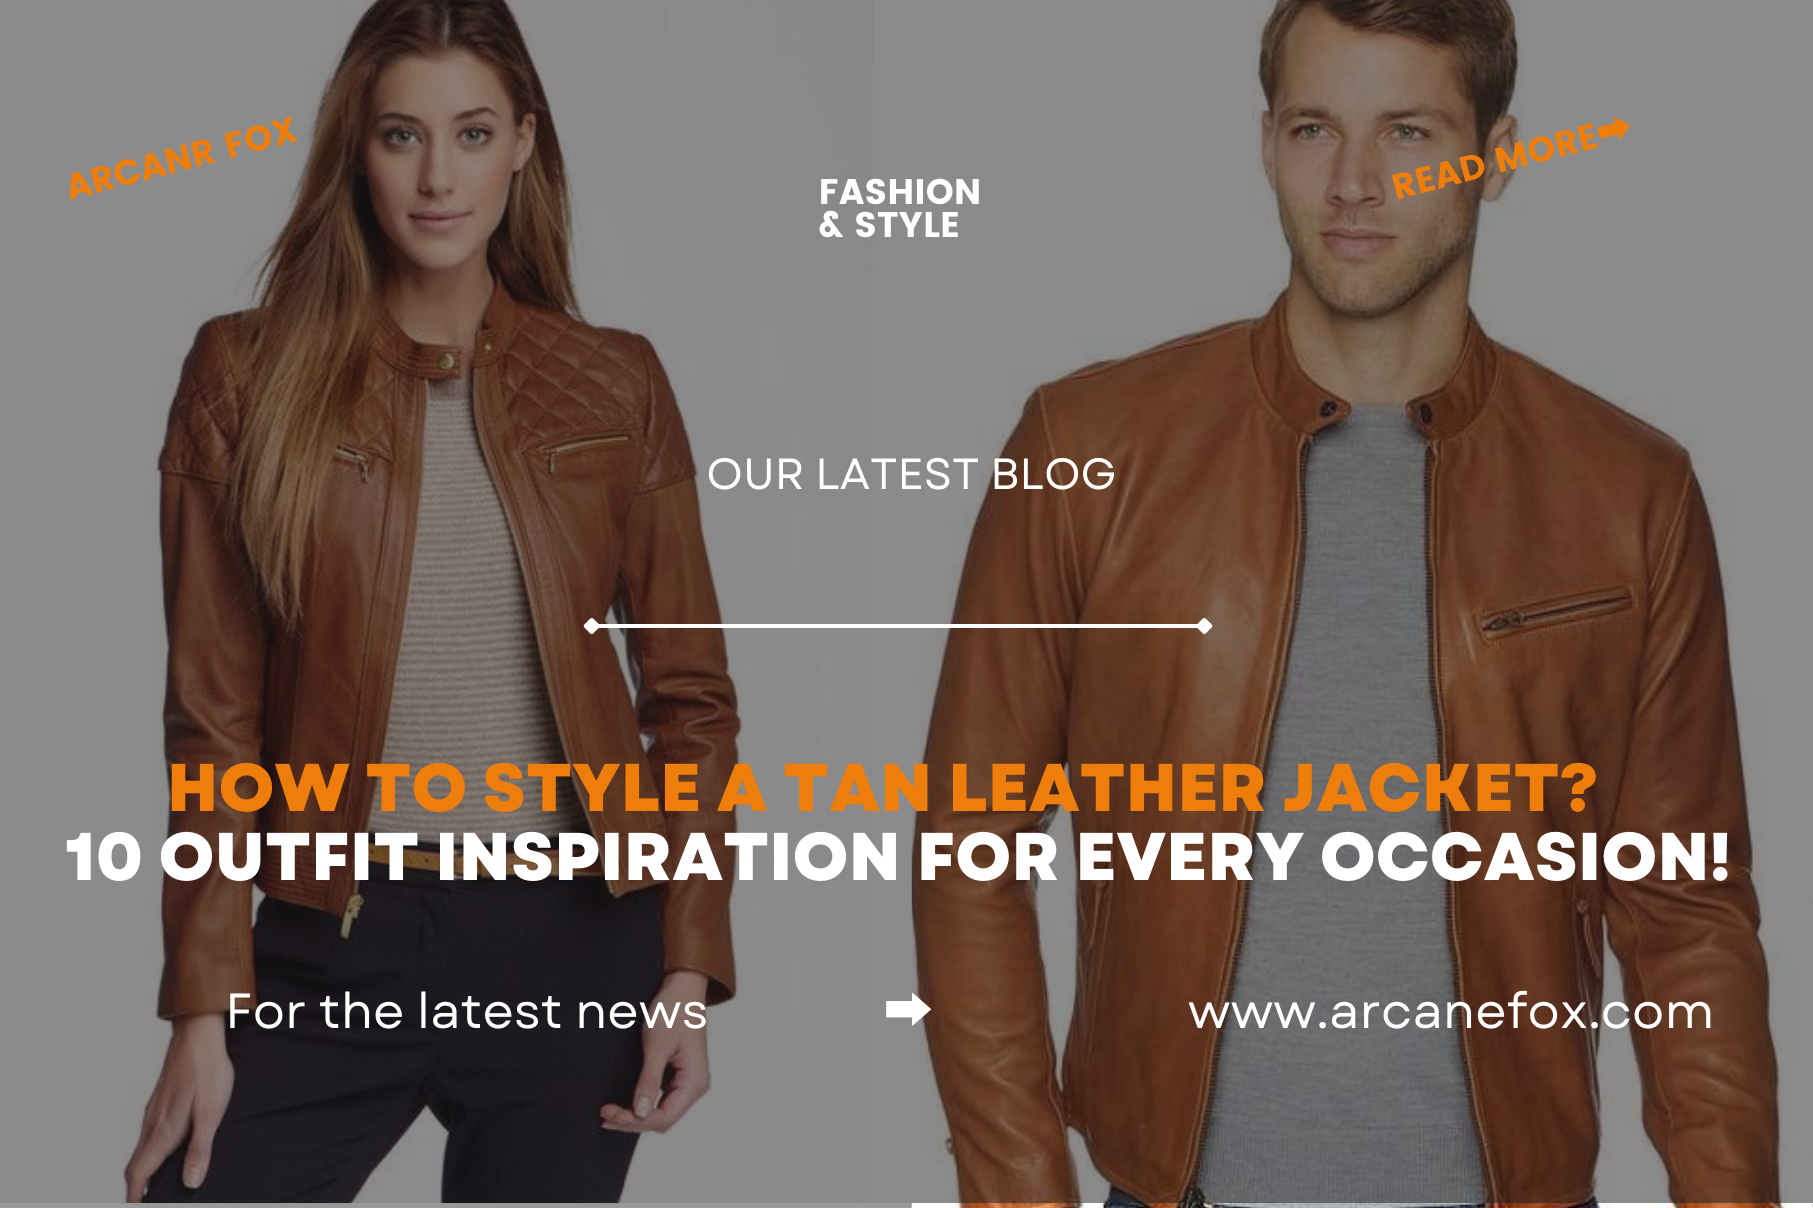 Buy Noor Mens Mango TAN Leather Jacket, Military BOMBER BIKER Leather Jacket,  A2 Flight Lambskin Leather Jacket, Personalize Special Gift Online in India  - Etsy